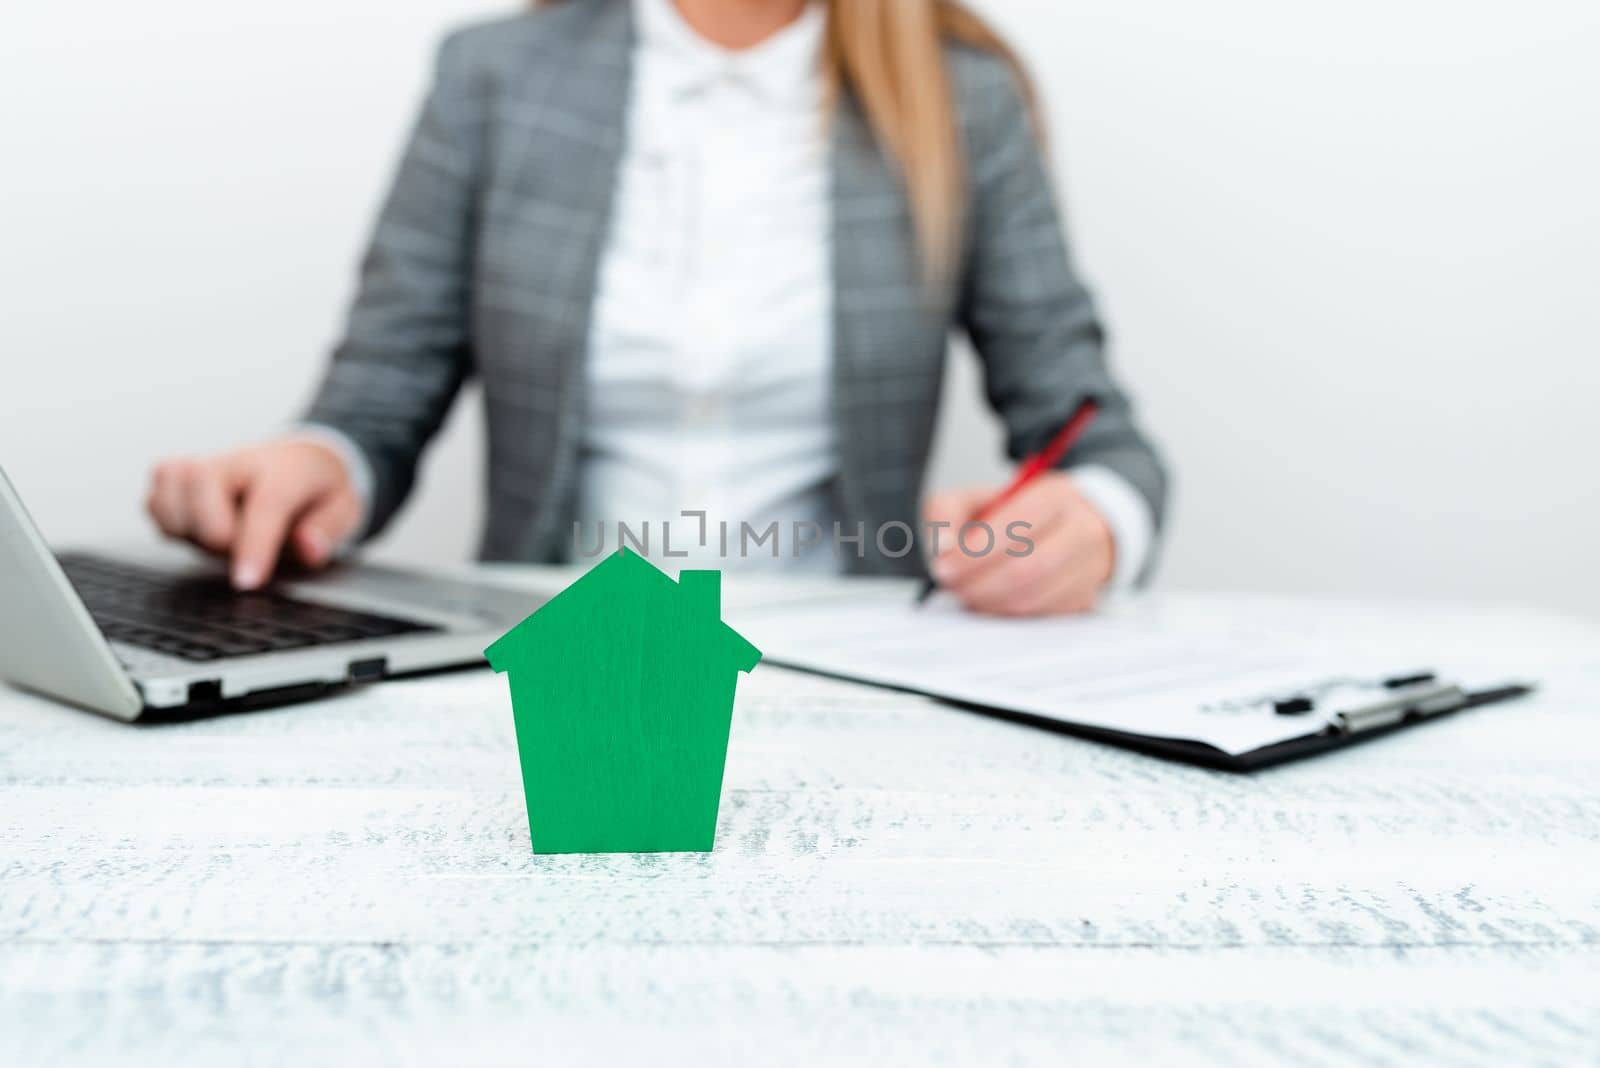 Businesswoman sitting at table writing in notebook and typing on laptop.